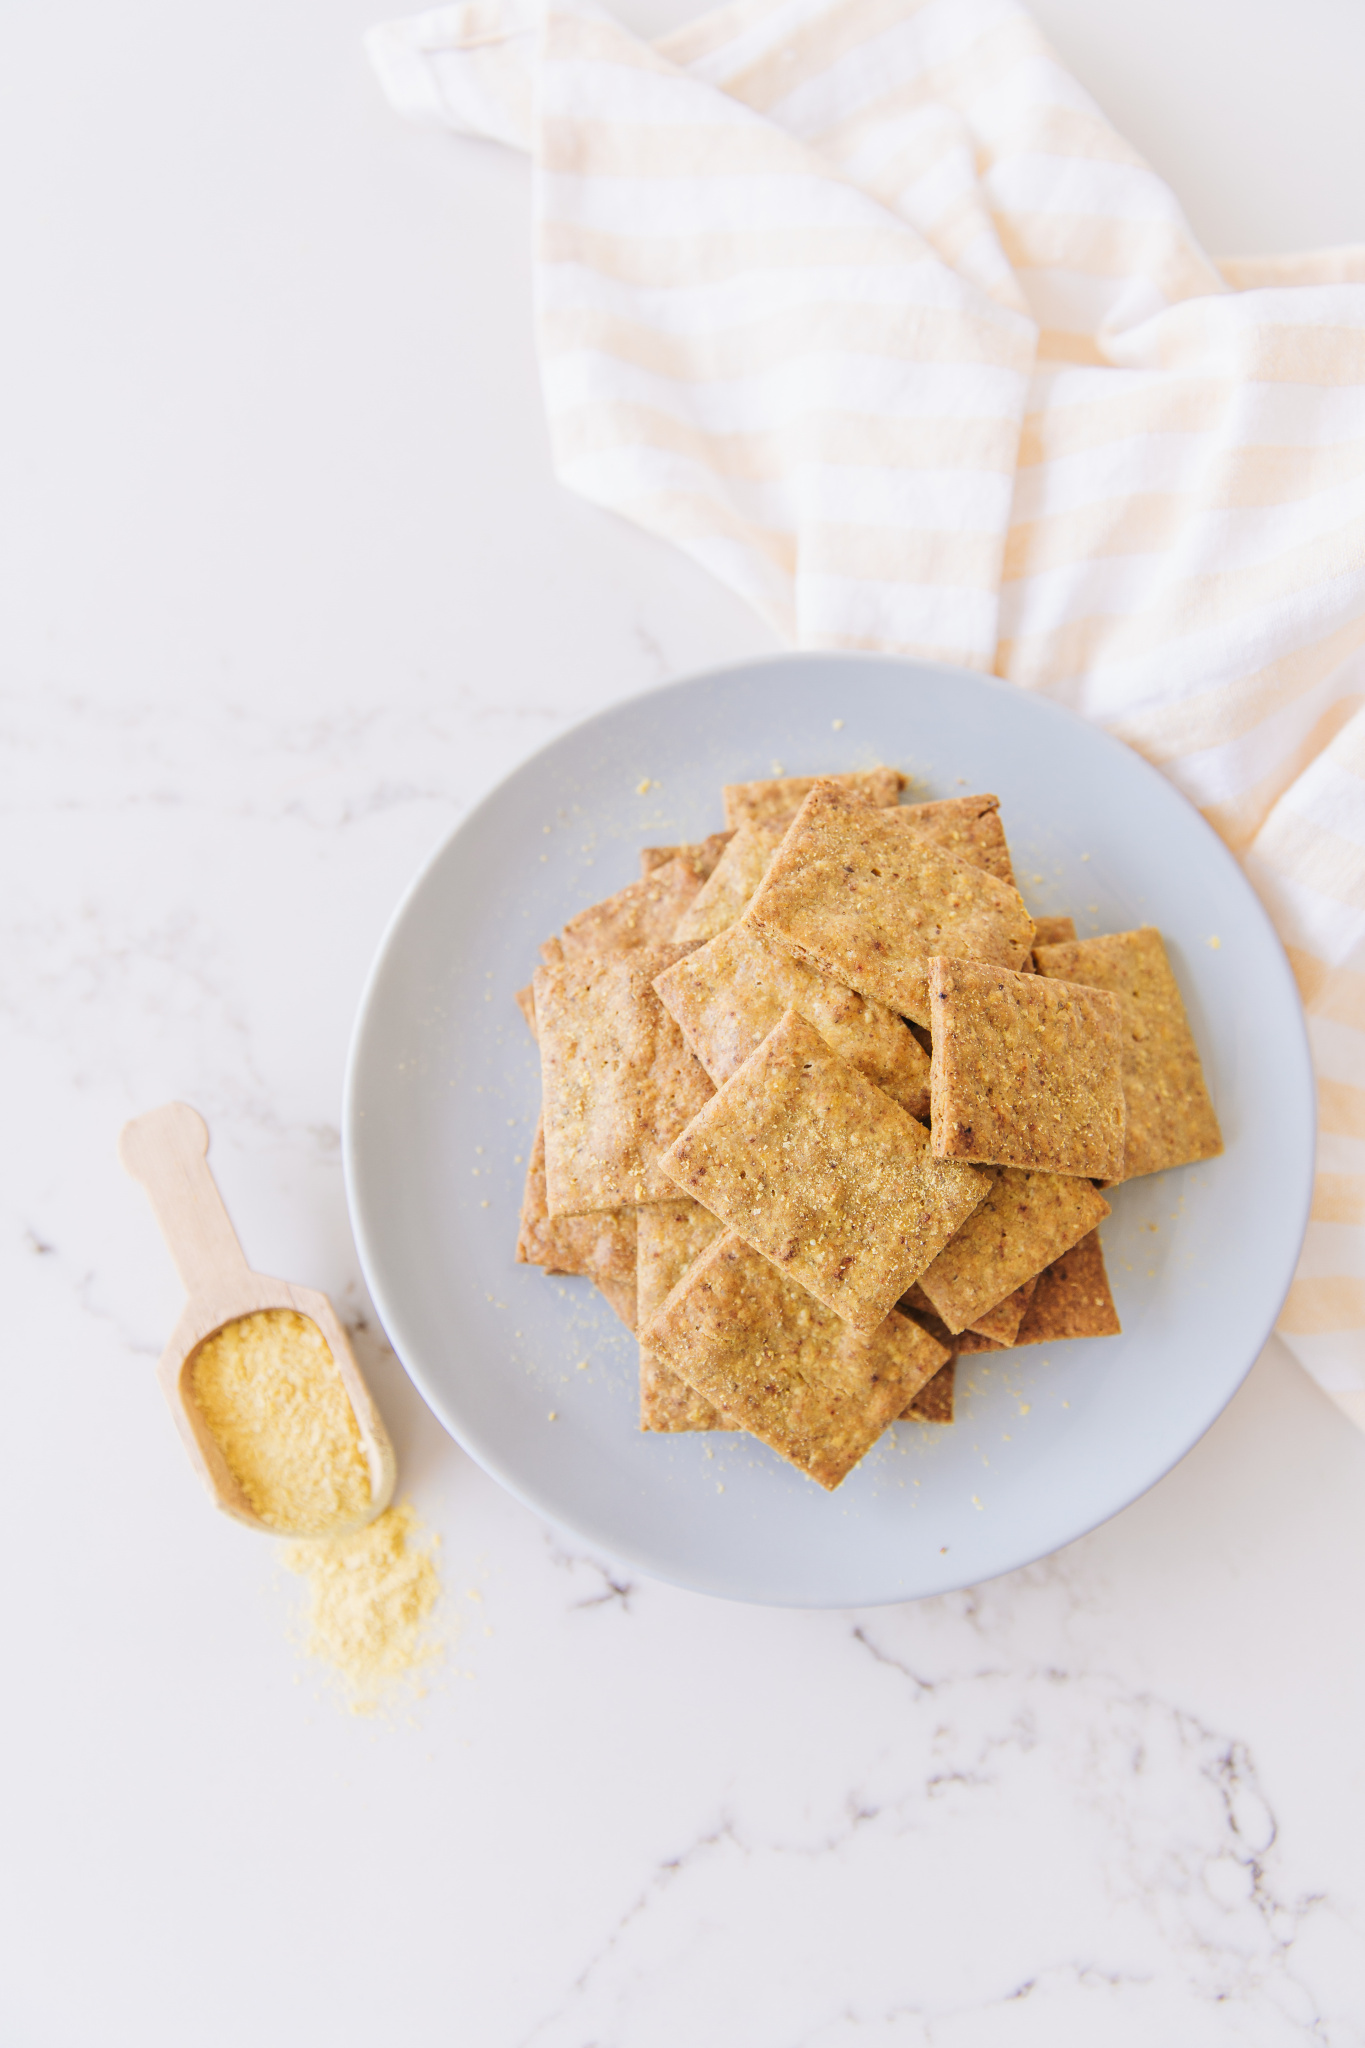 Cheesy Golden Crackers, healthy, low sugar, plant-based